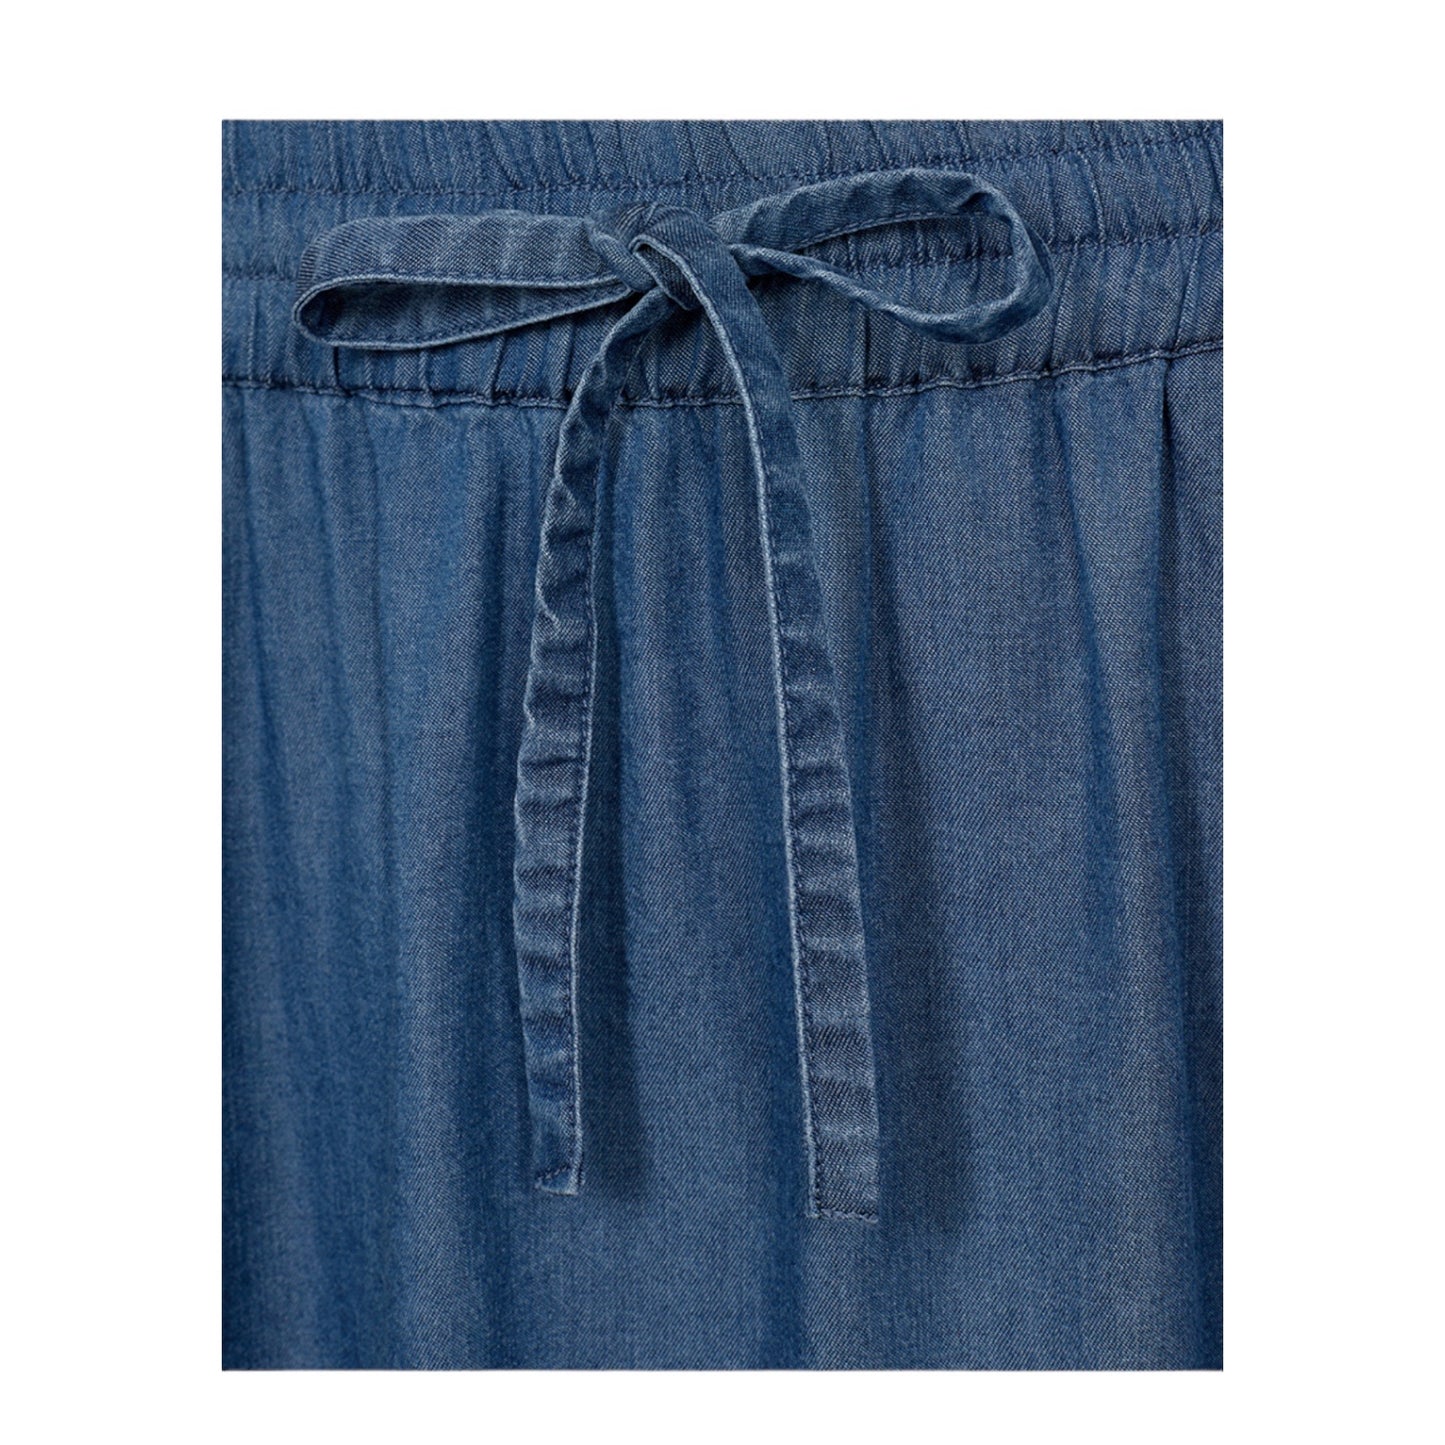 Freequent Carly Denim Nederdel - FQCARLY Skirt